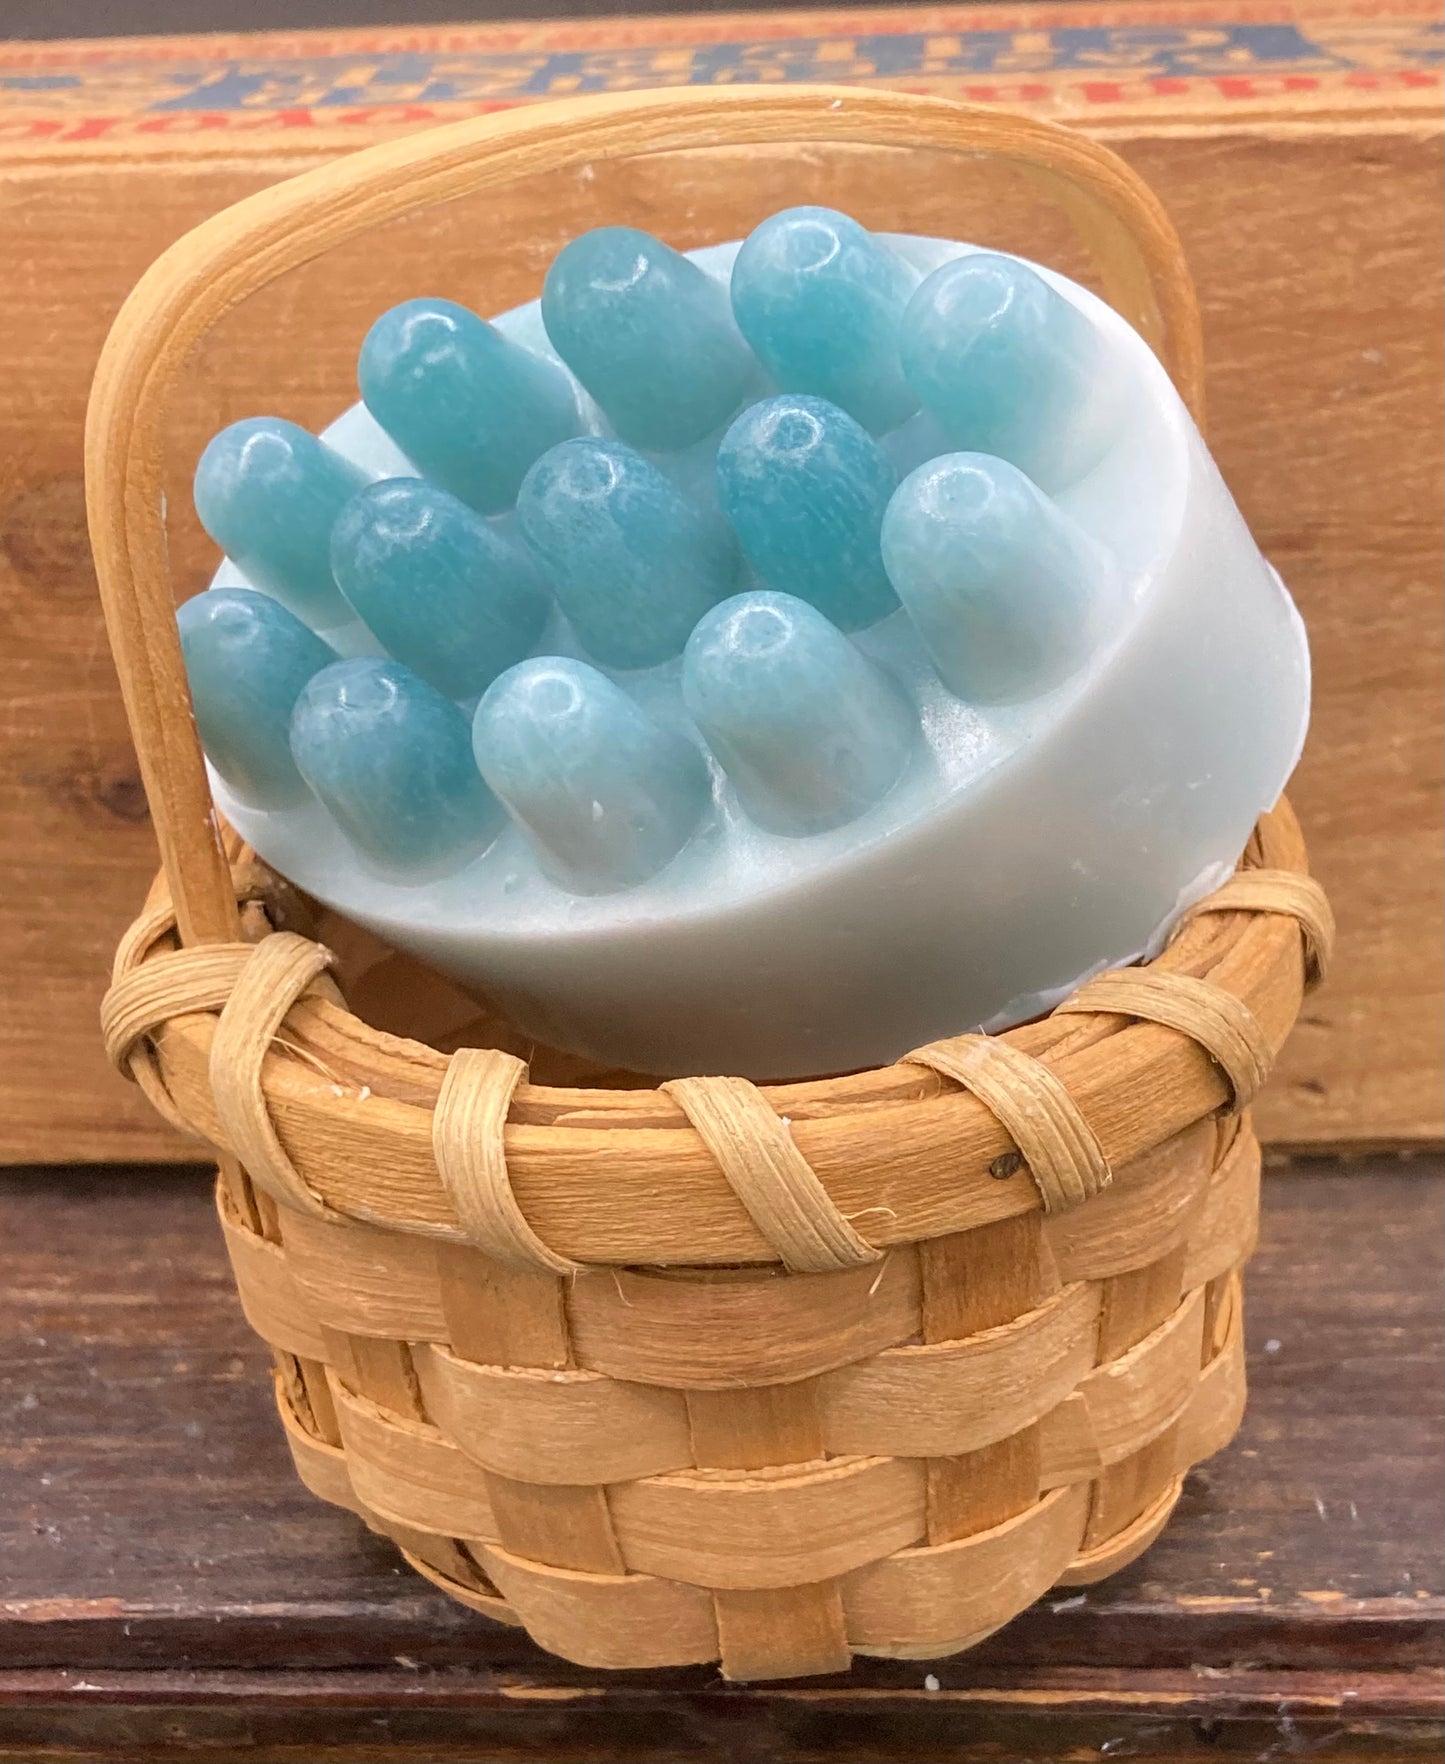 A soothing massage bar of Eucalyptus Mint Scented Goats Milk Soap.  This is the bar with the bumps that make a wonderful spa-like experience.